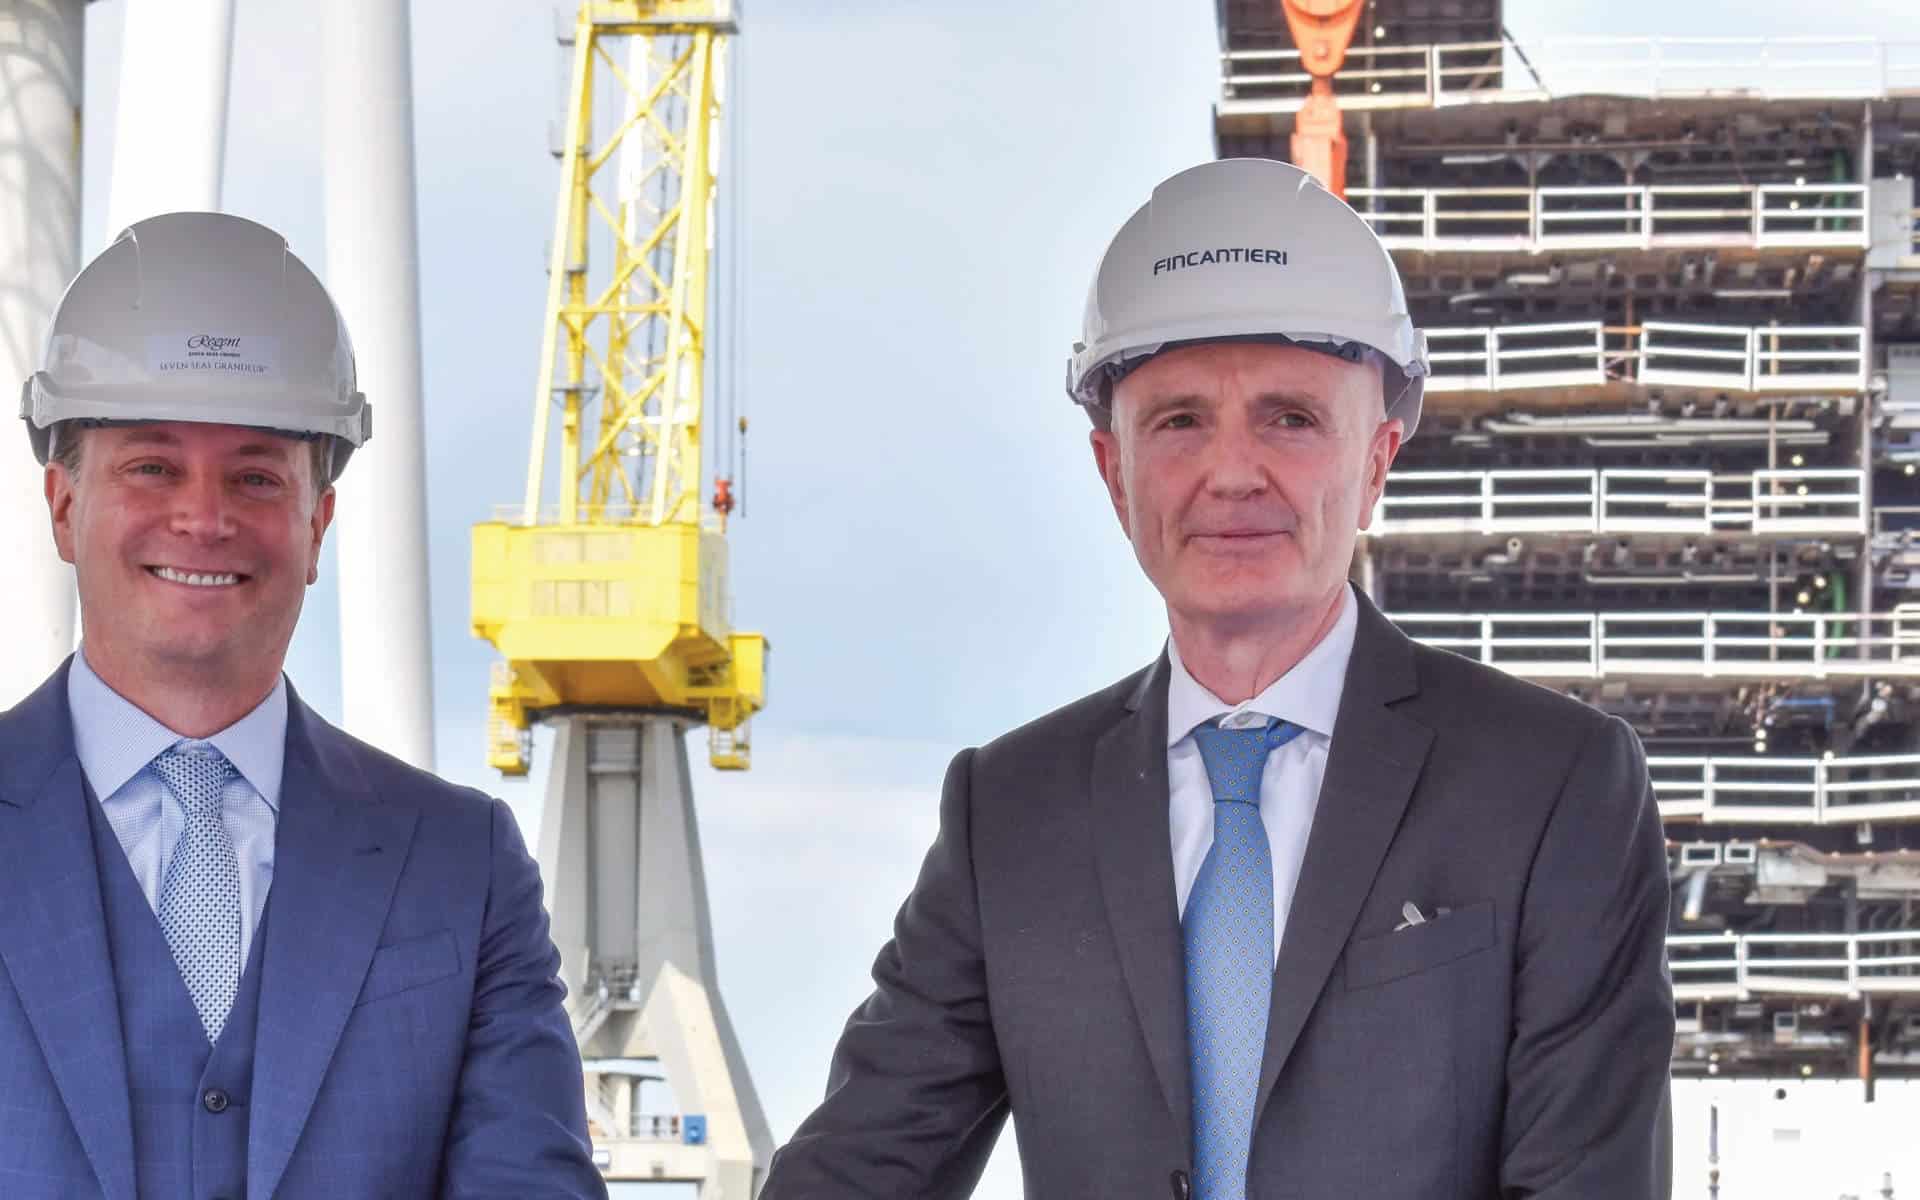 Seven Seas Grandeur construction milestone: Jason Montague, President and Chief Executive Officer di Regent Seven Seas Cruises and Gilberto Tobaldi, director of Fincantieri at the keel laying ceremony.